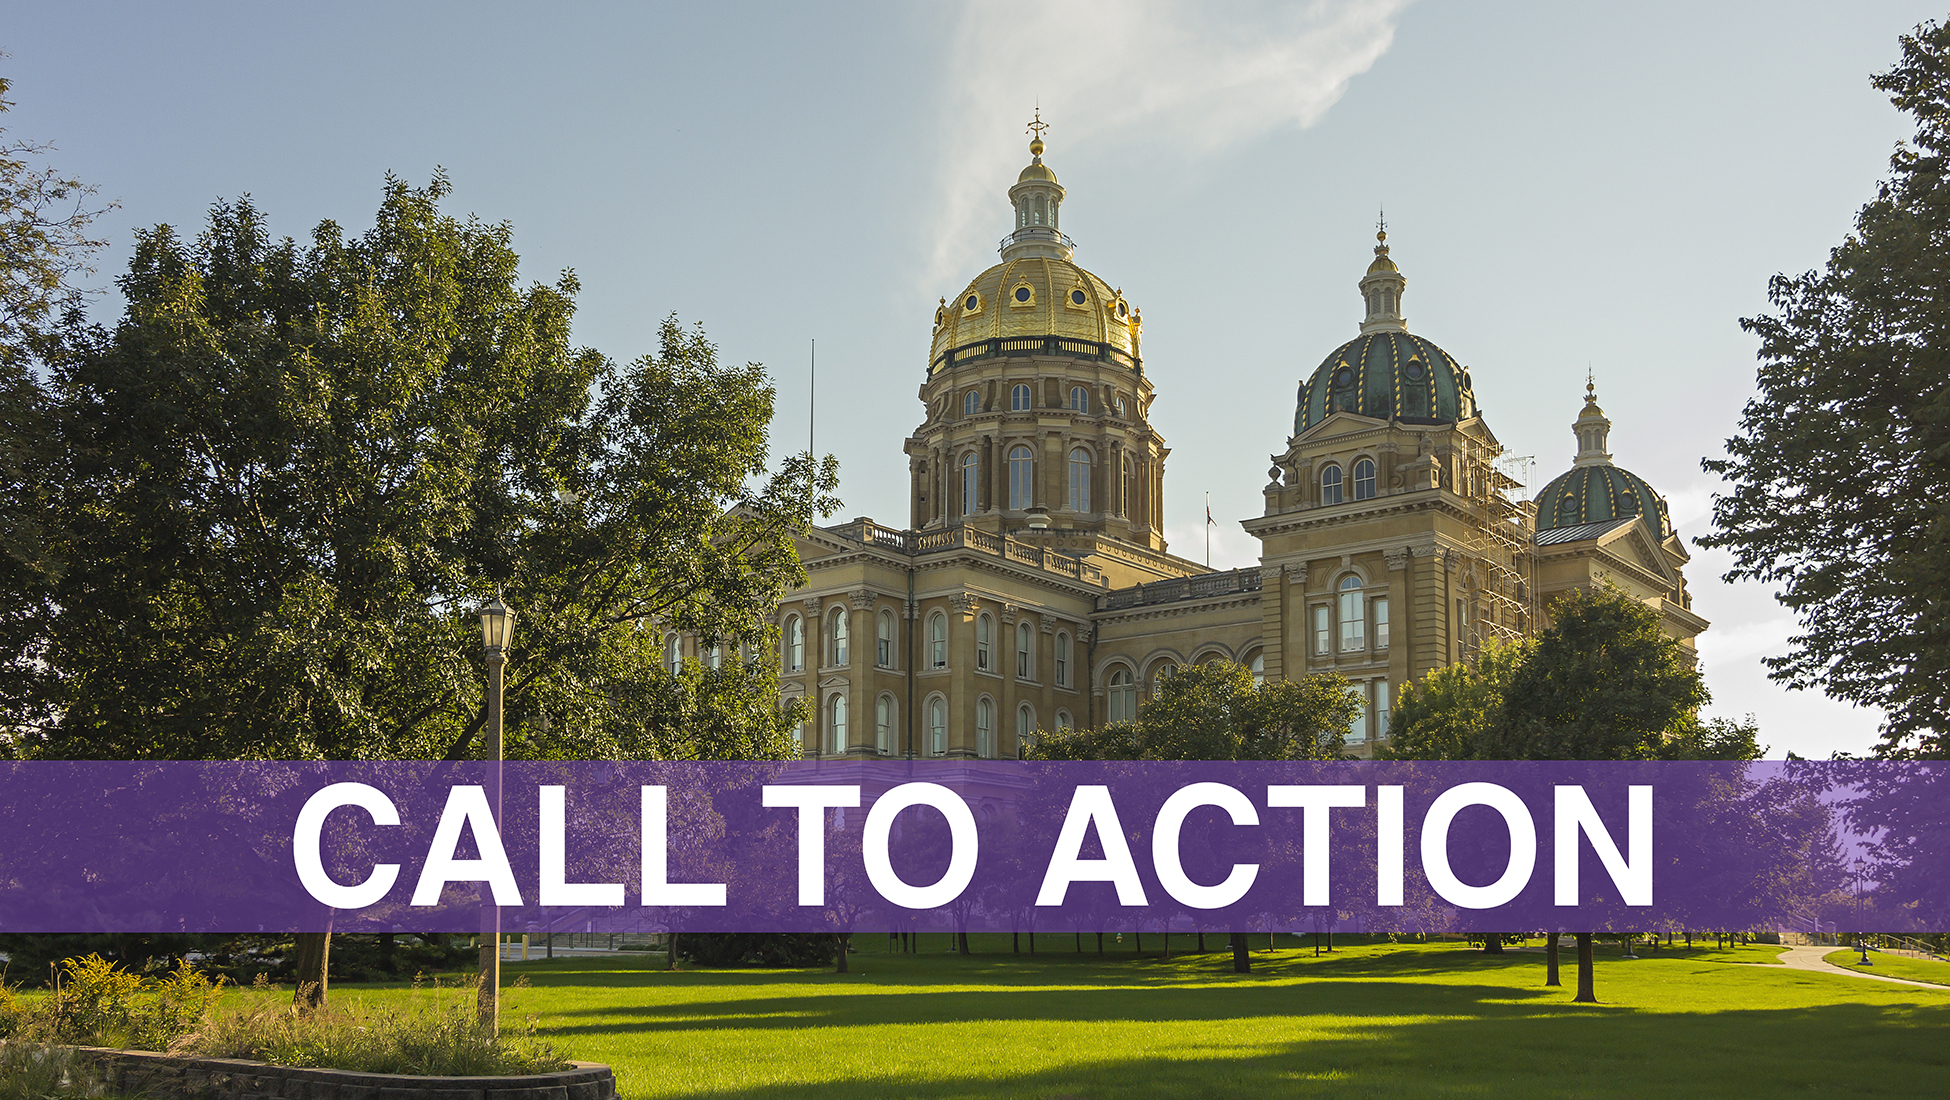 Call to Action - 03.06.2022